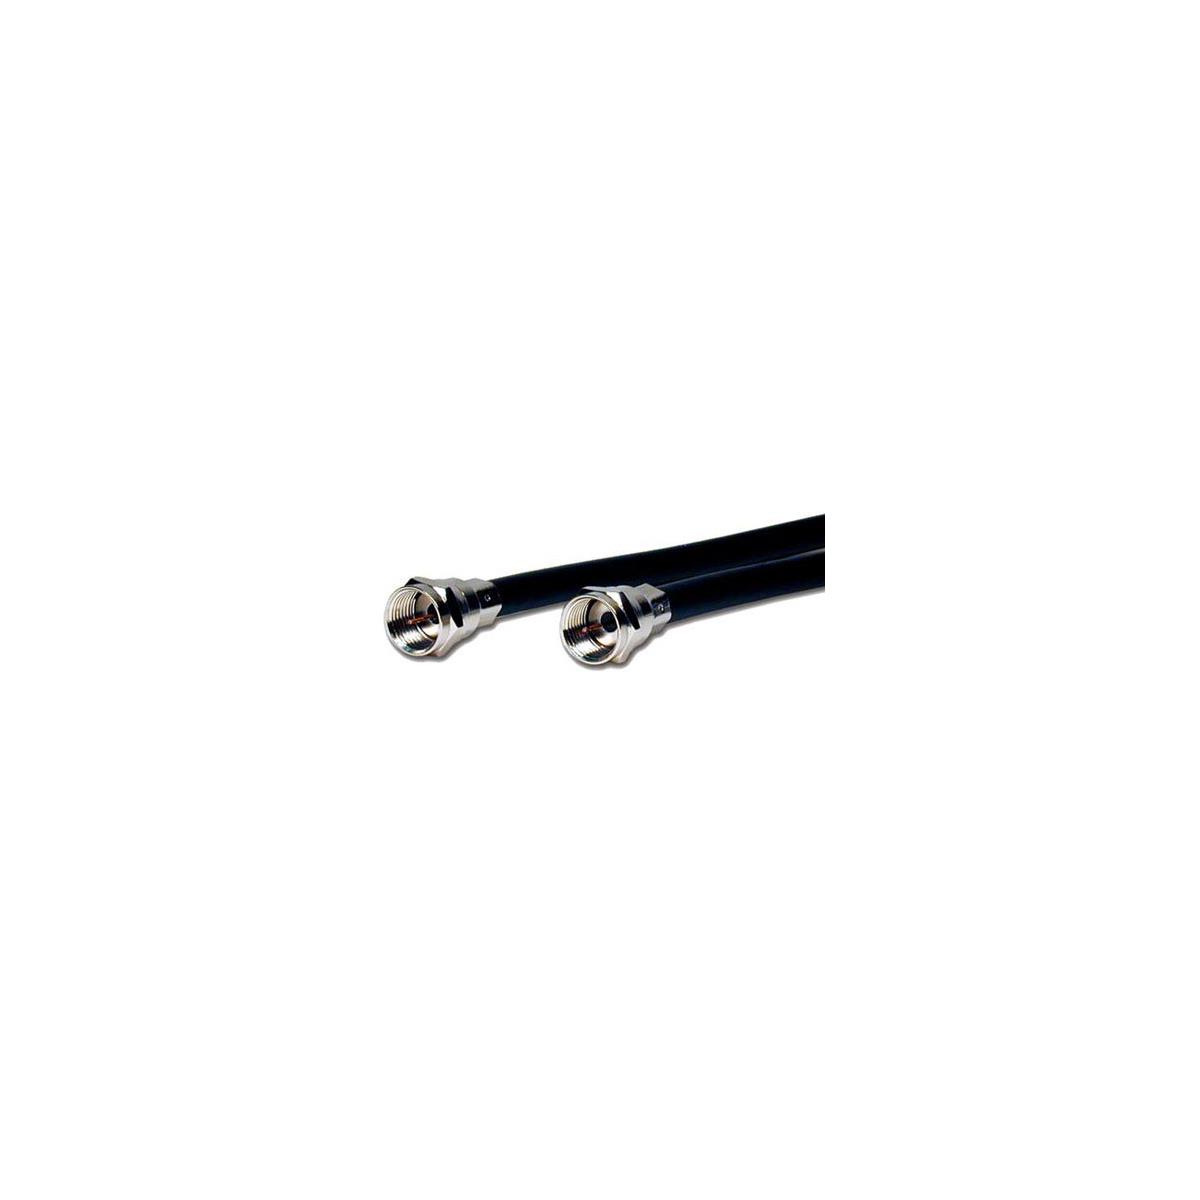 Image of Comprehensive 3' Standard Series RF Coax Video Cable